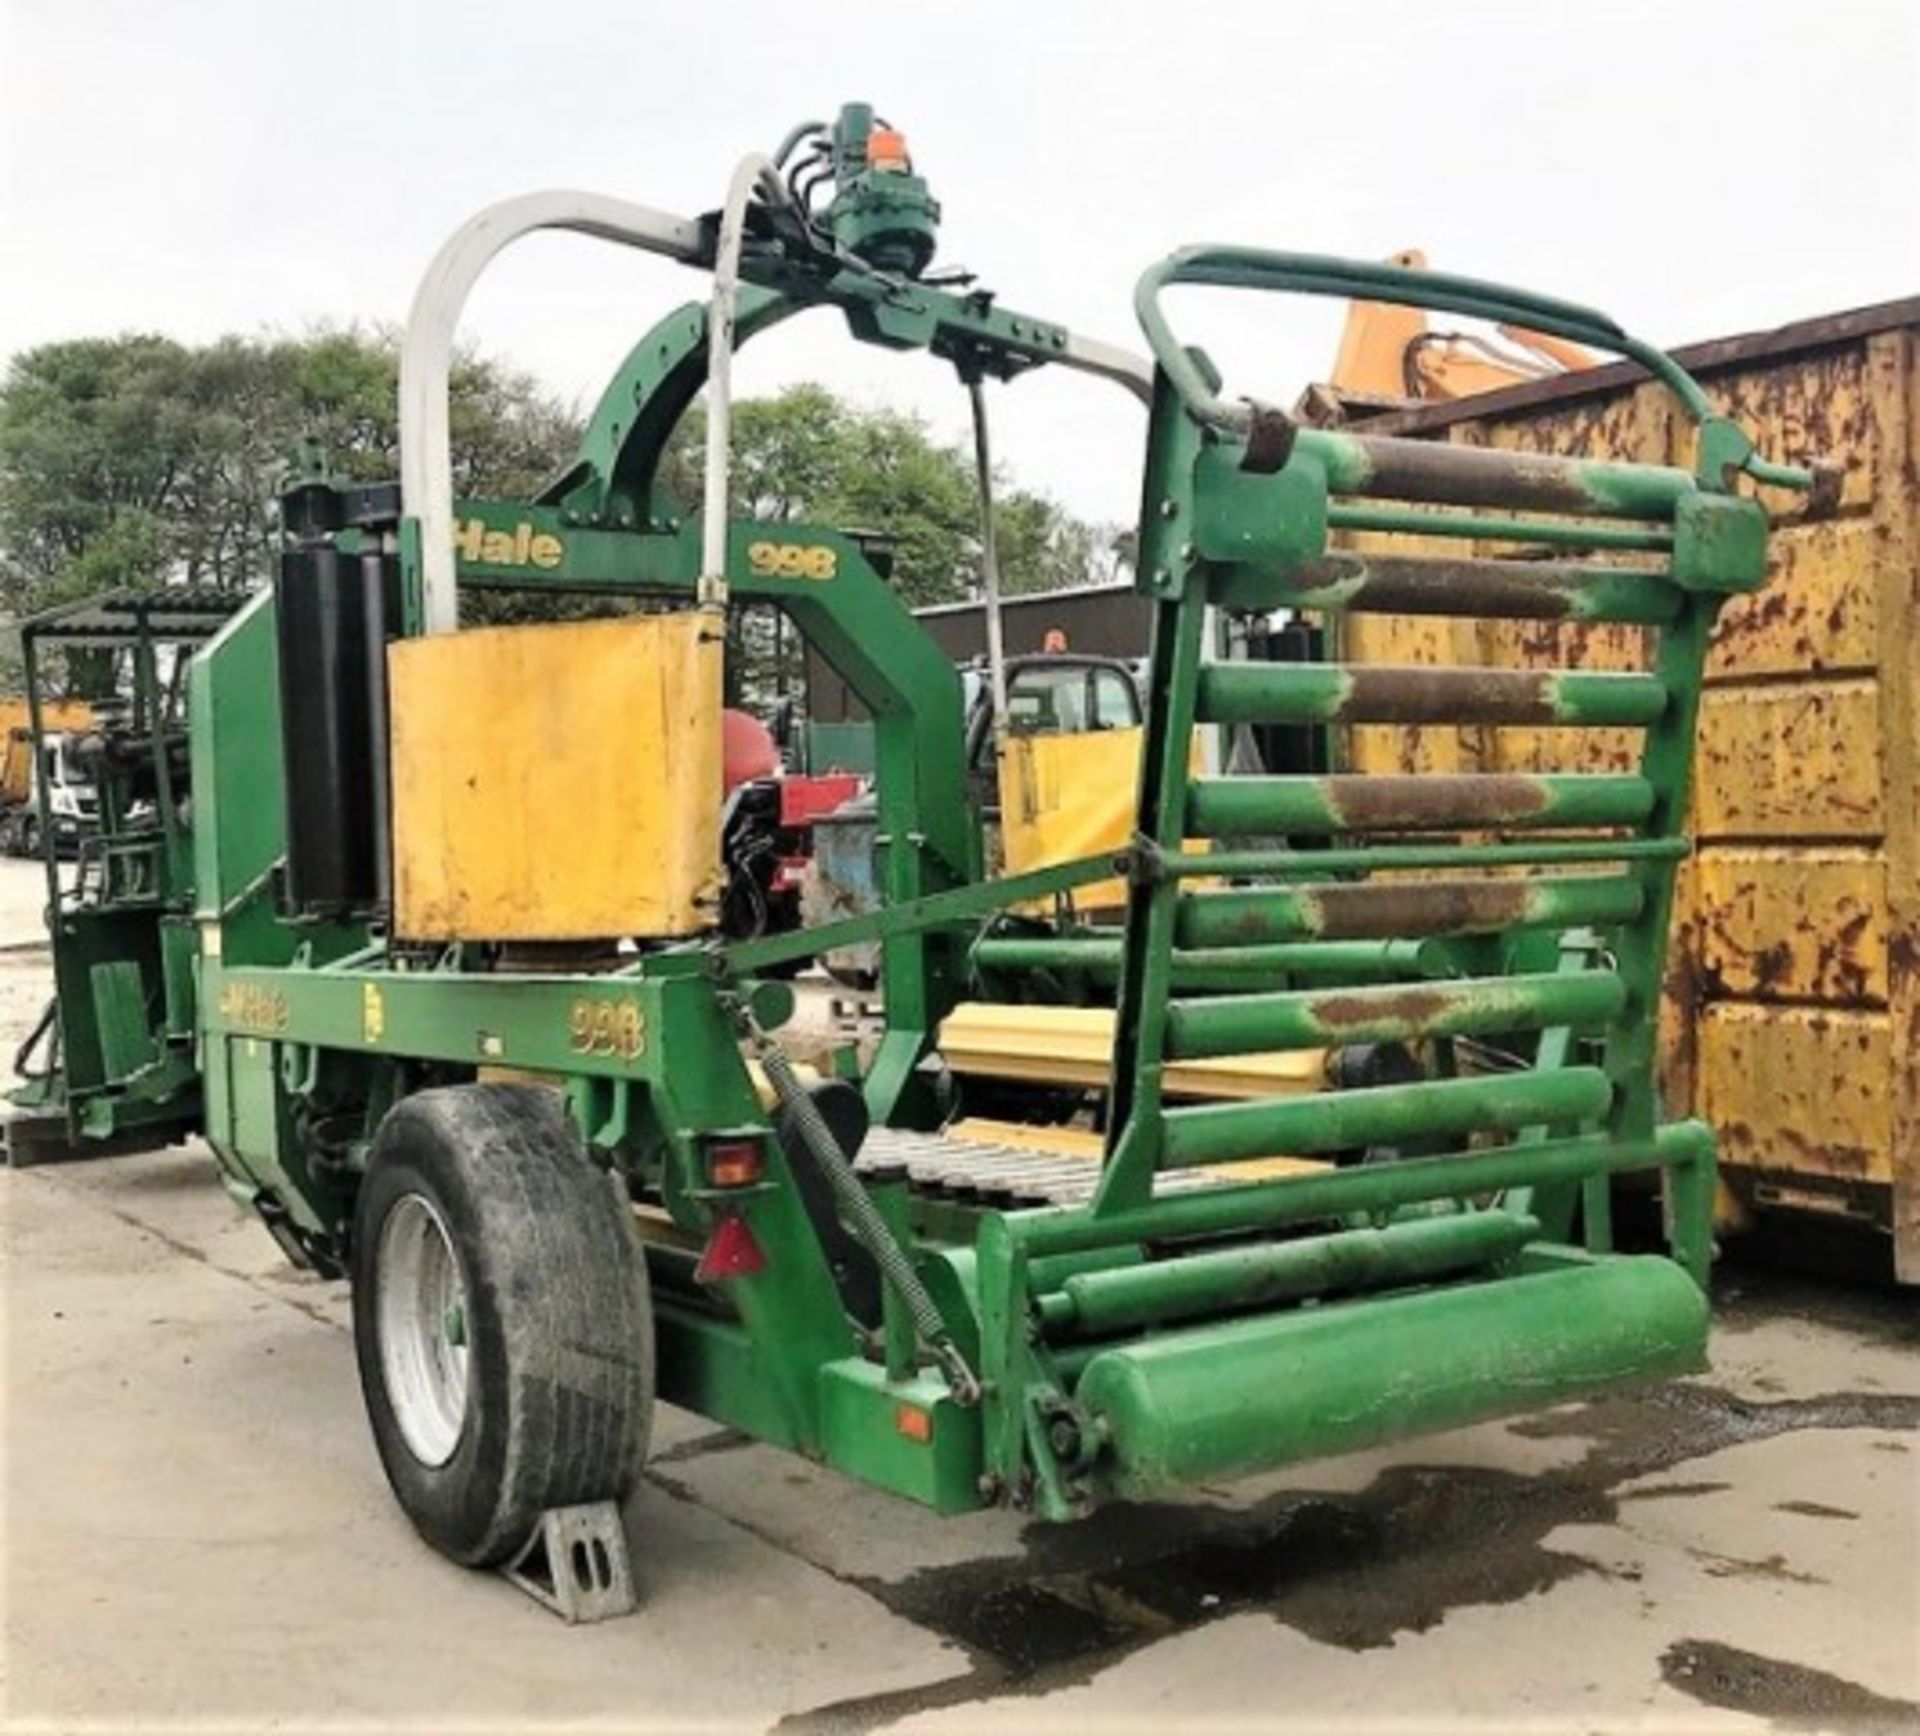 2007 MCHALE 998 square bale wrapper s/n 250627. Runs on diesel engine. c/w 2 remote controls, servic - Image 6 of 20